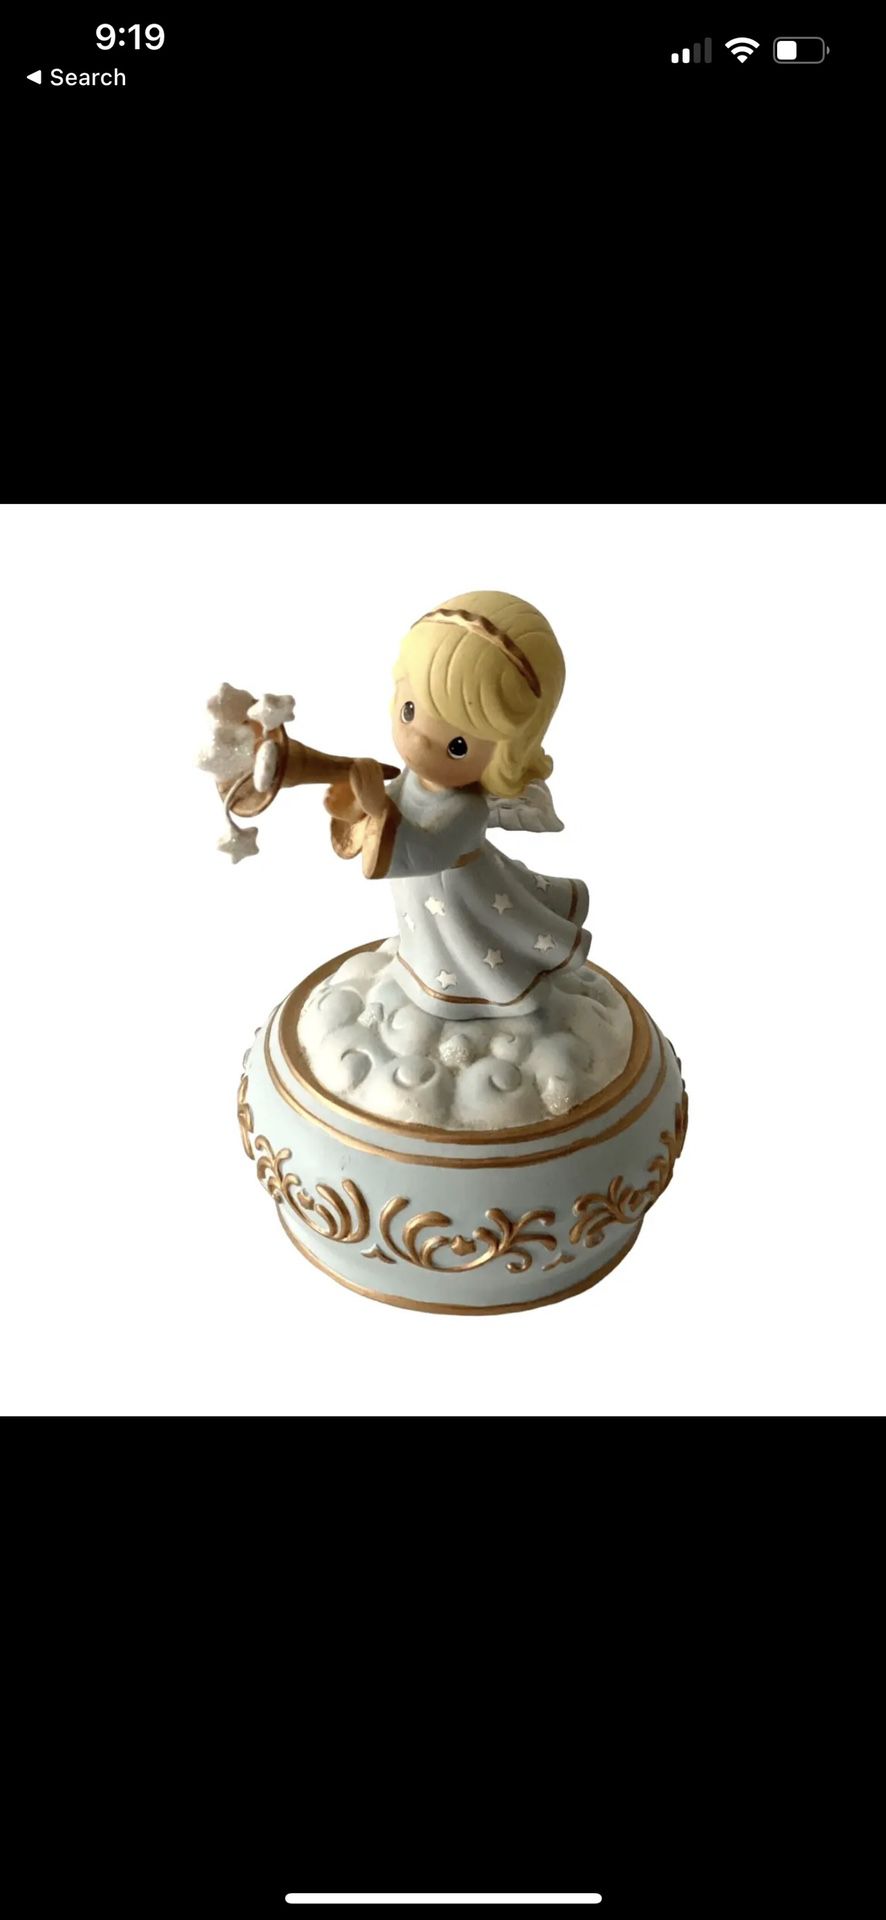 Precious Moments "Share The Gift of Love" Musical Figurine - Trumpeting Angel 